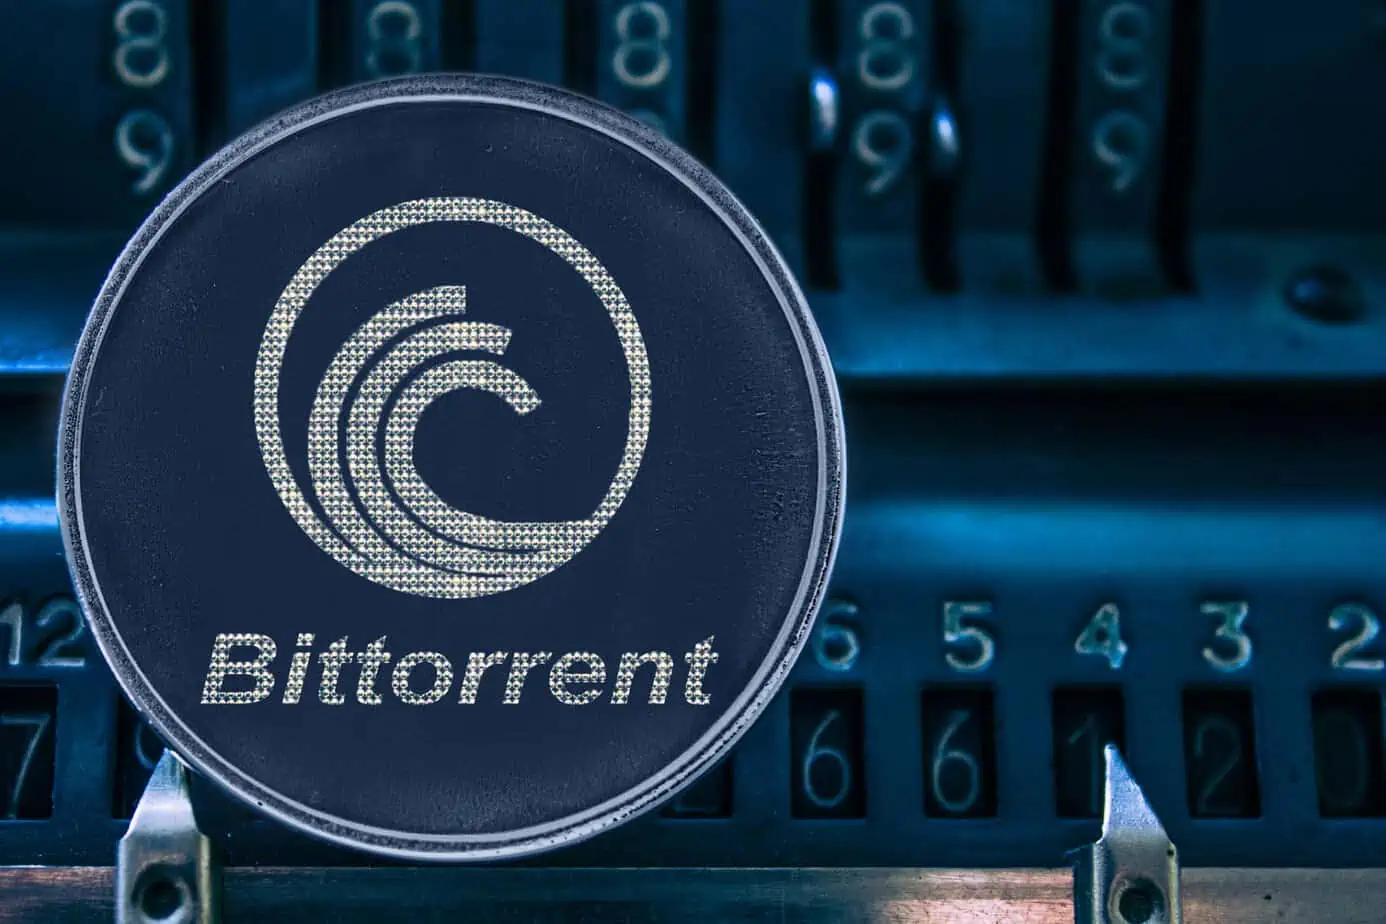 How to buy BitTorrent coin (BTT) ? Step by step guide for buying BTT | Ledger